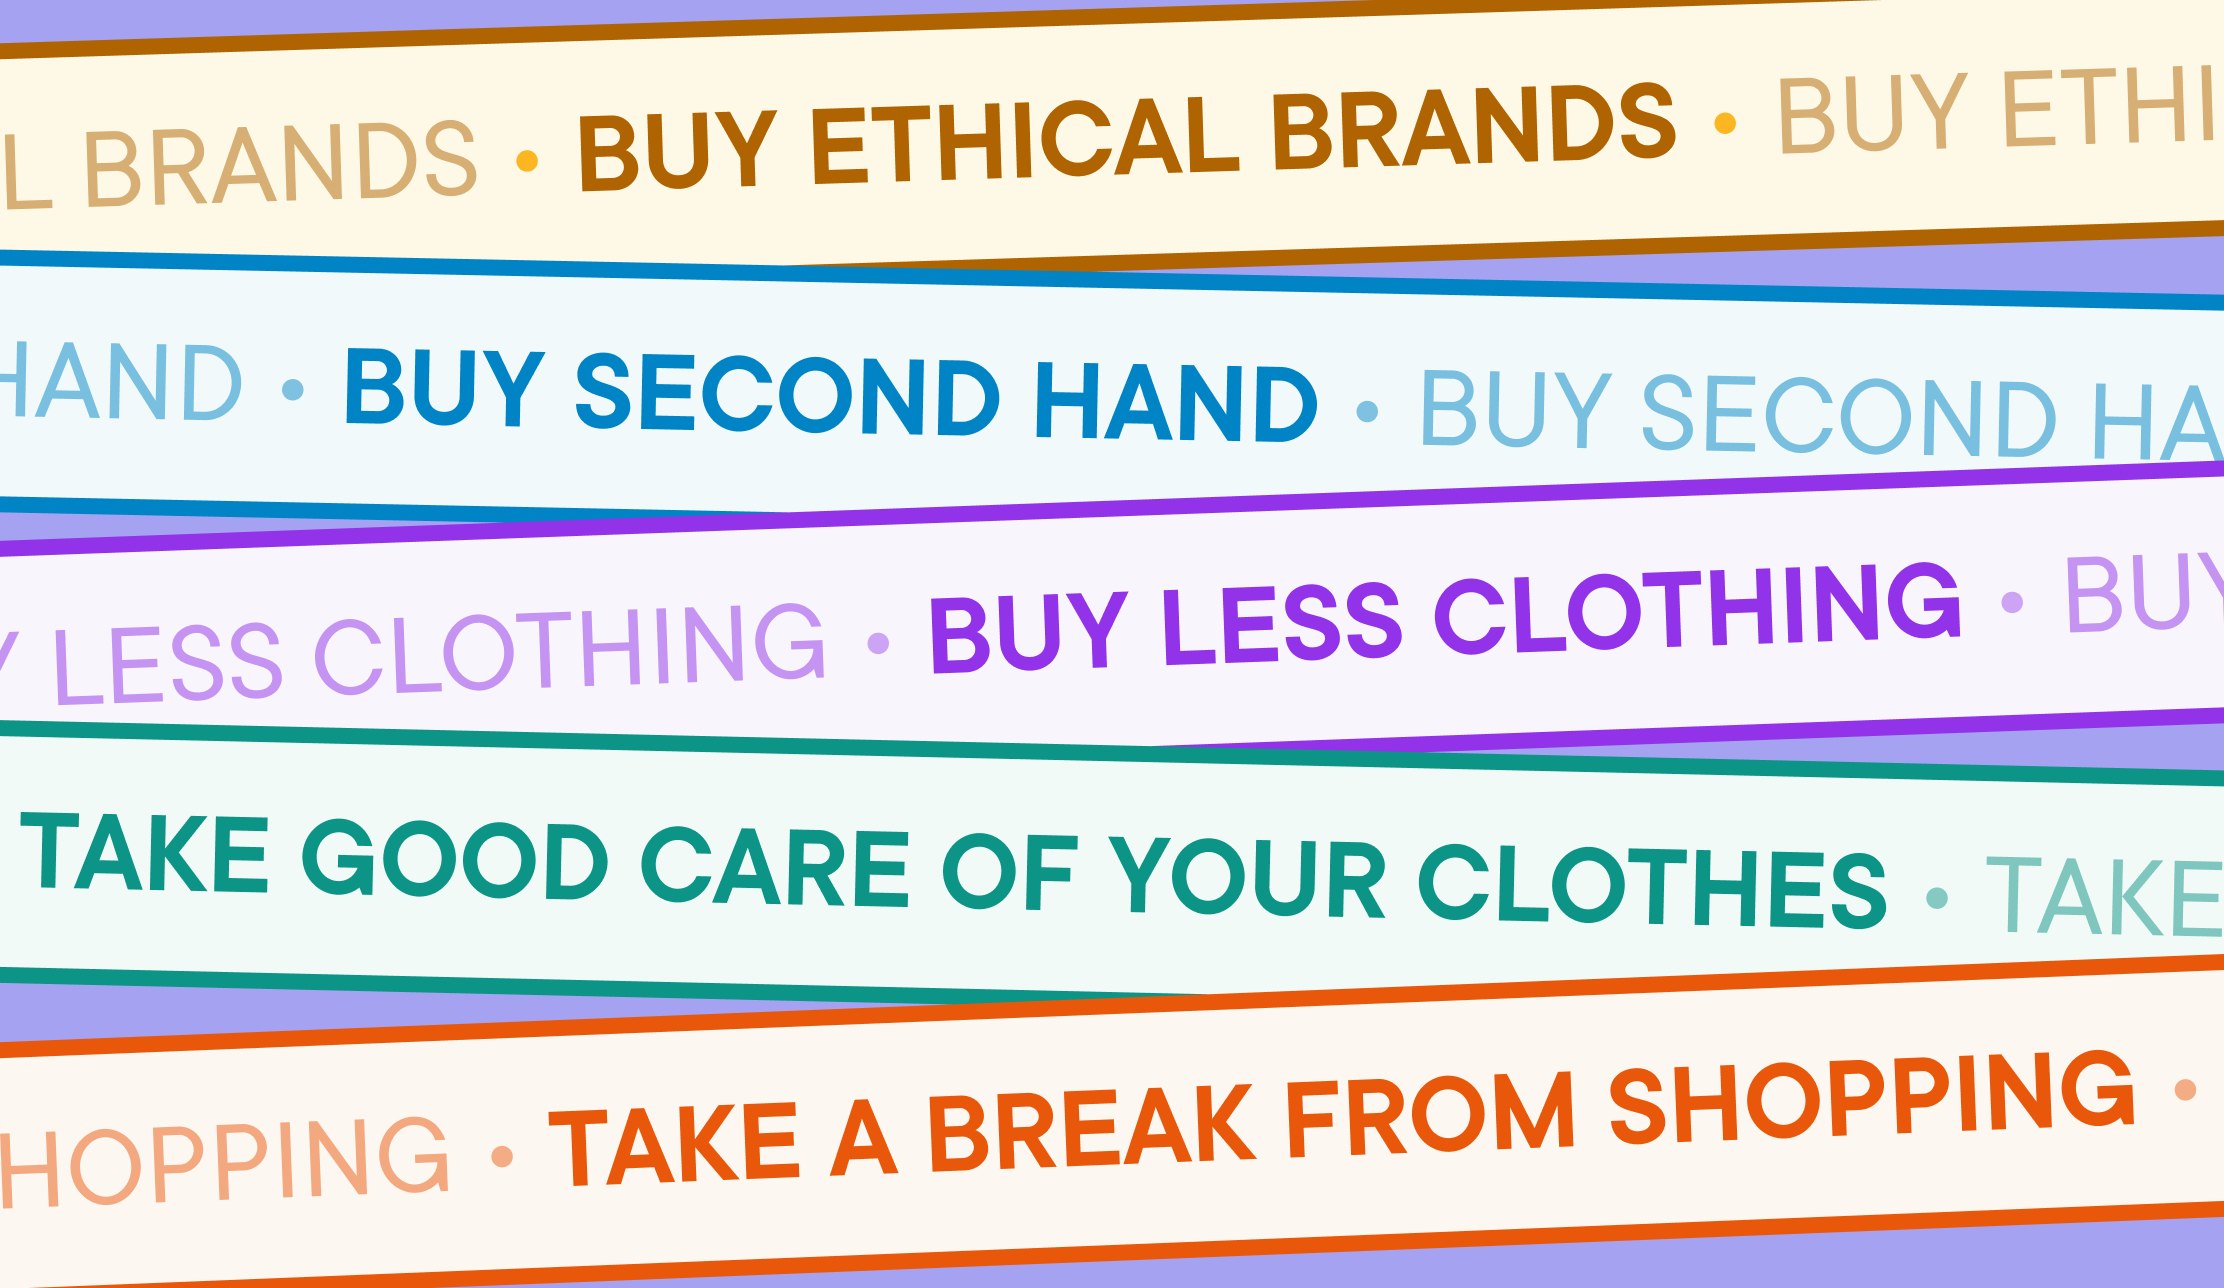 Ethical clothing shopping: Buy ethical brands, buy second hand, buy less clothing, take good care of your clothes, take a break from shopping